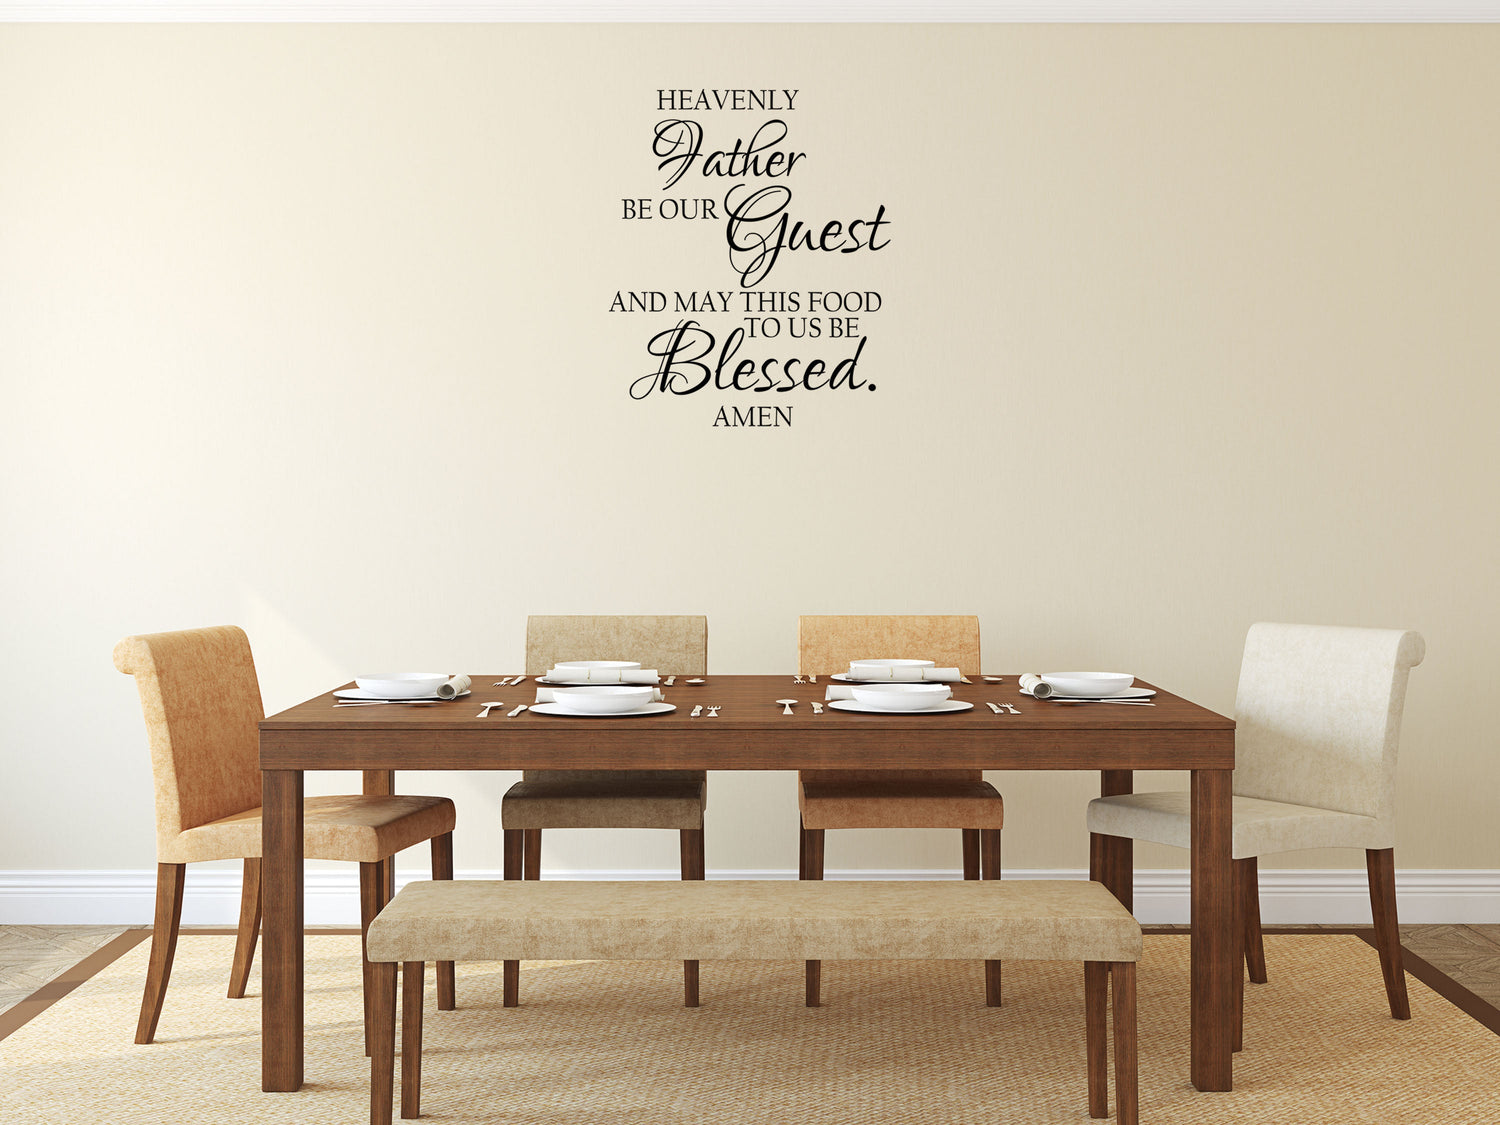 Heavenly Father Be Our Guest Vinyl Wall Decal Inspirational Wall Signs 